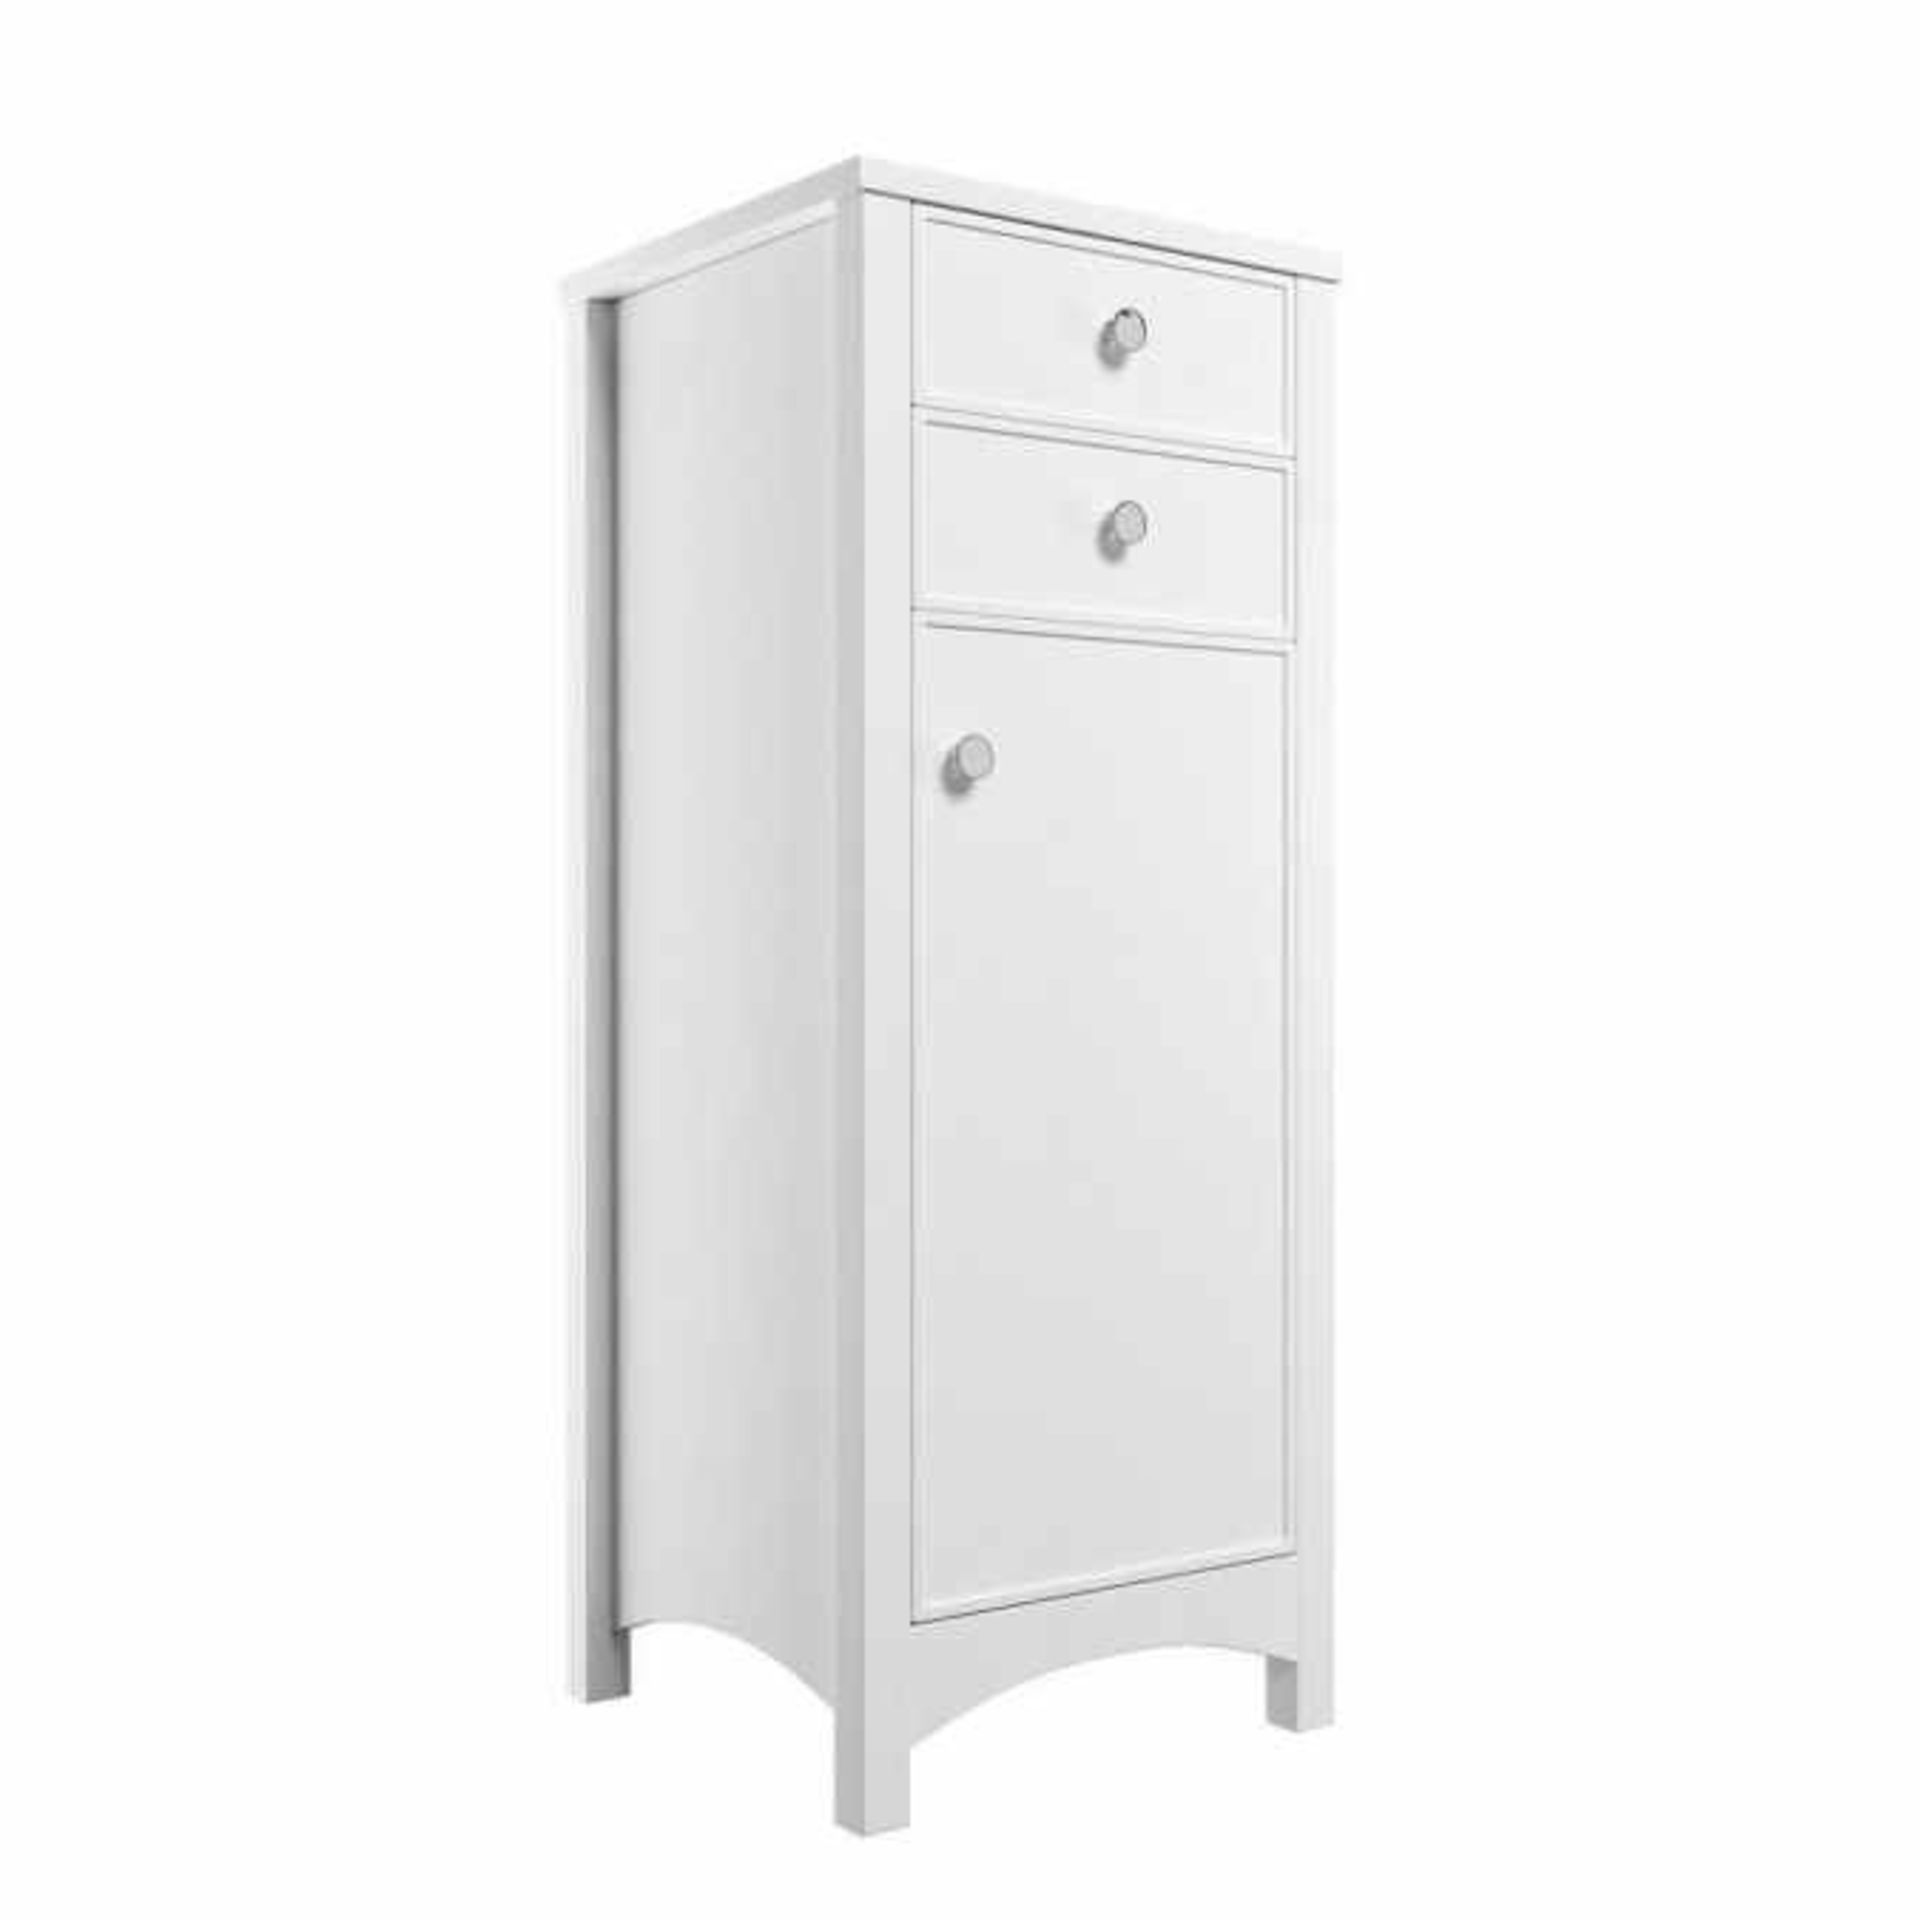 New (Y107) Lucia 465mm Tall Boy Unit In Satin White Ash. RRP £395.00. Truly Transitional Range... - Image 2 of 2